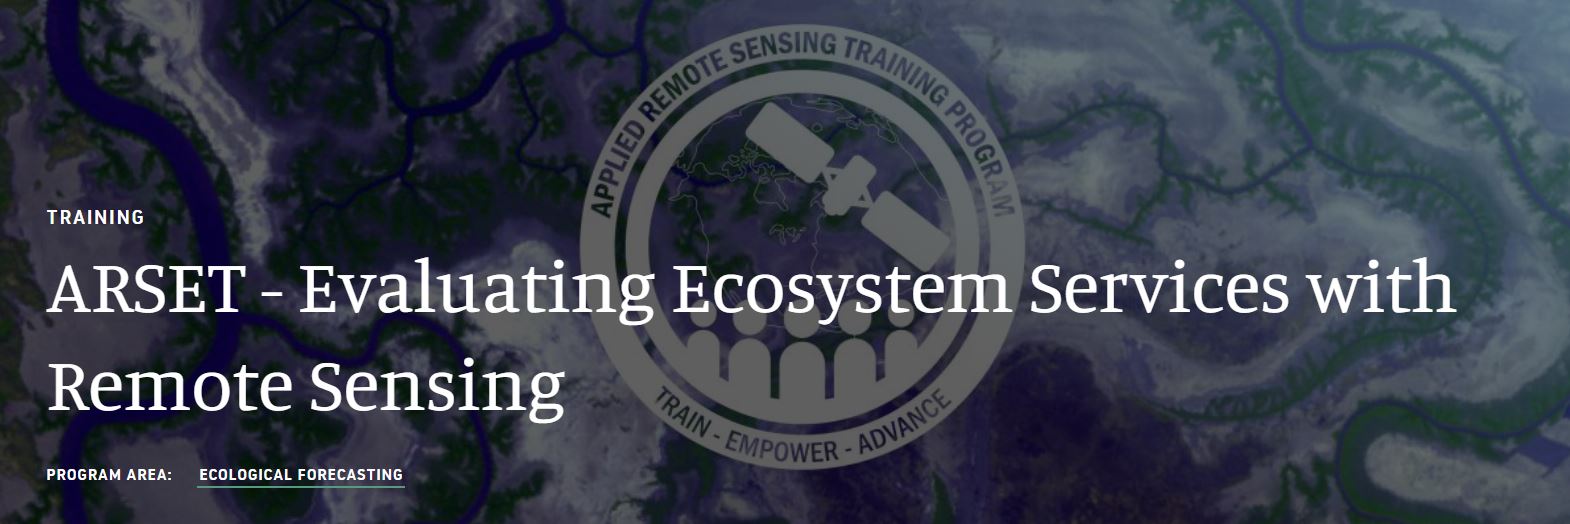 Banner image announcing the ARSET Evaluating Ecosystem Services with Remote Sensing